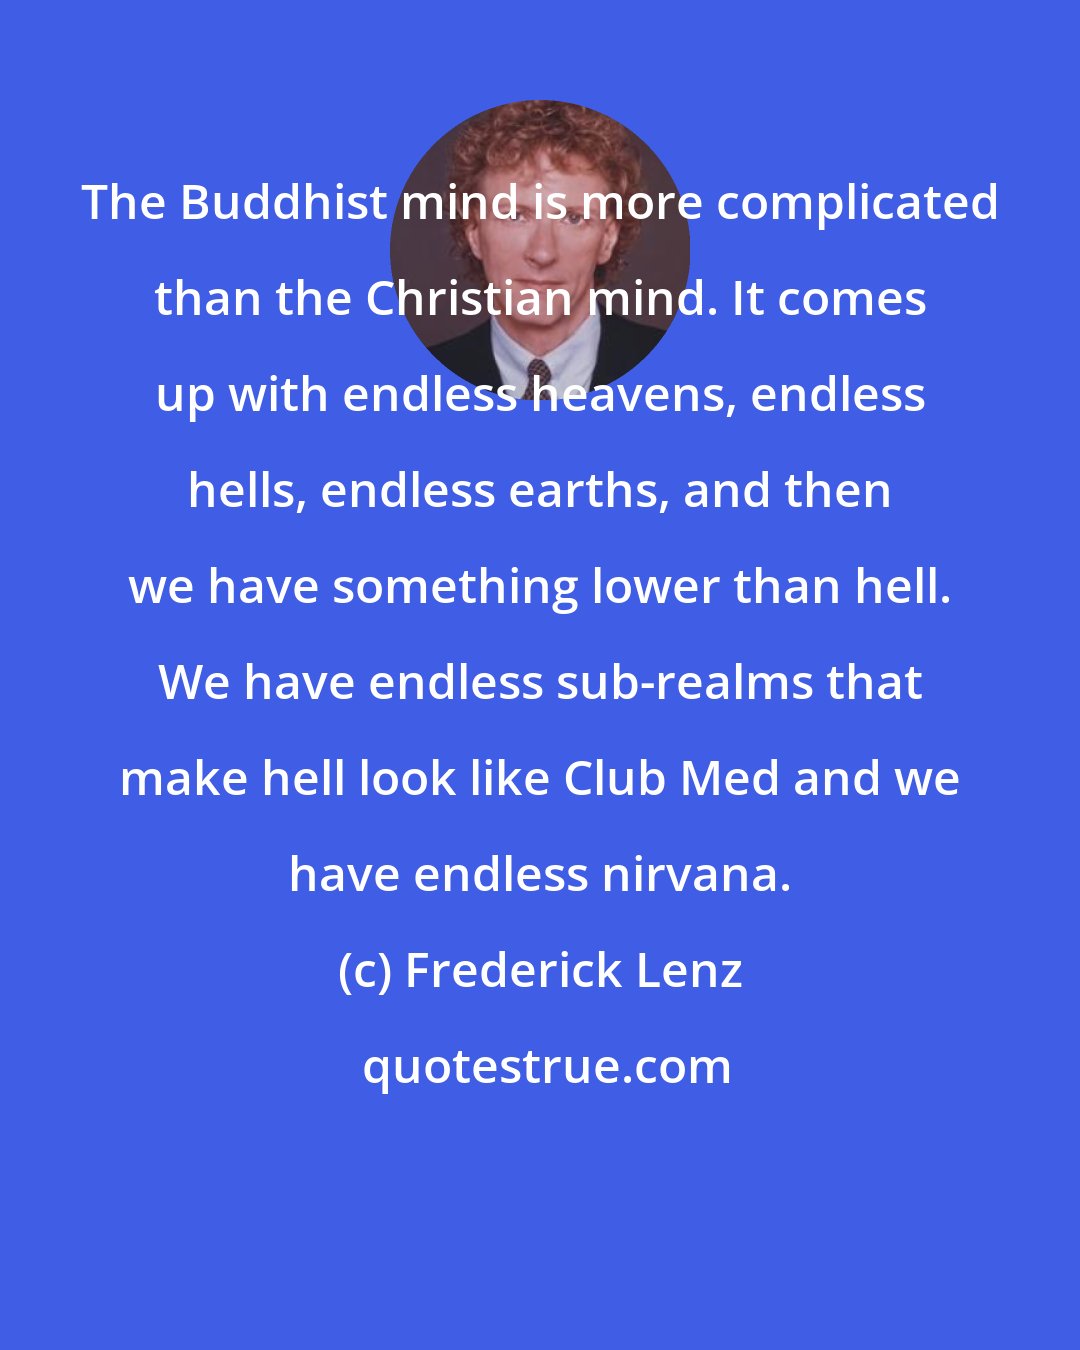 Frederick Lenz: The Buddhist mind is more complicated than the Christian mind. It comes up with endless heavens, endless hells, endless earths, and then we have something lower than hell. We have endless sub-realms that make hell look like Club Med and we have endless nirvana.